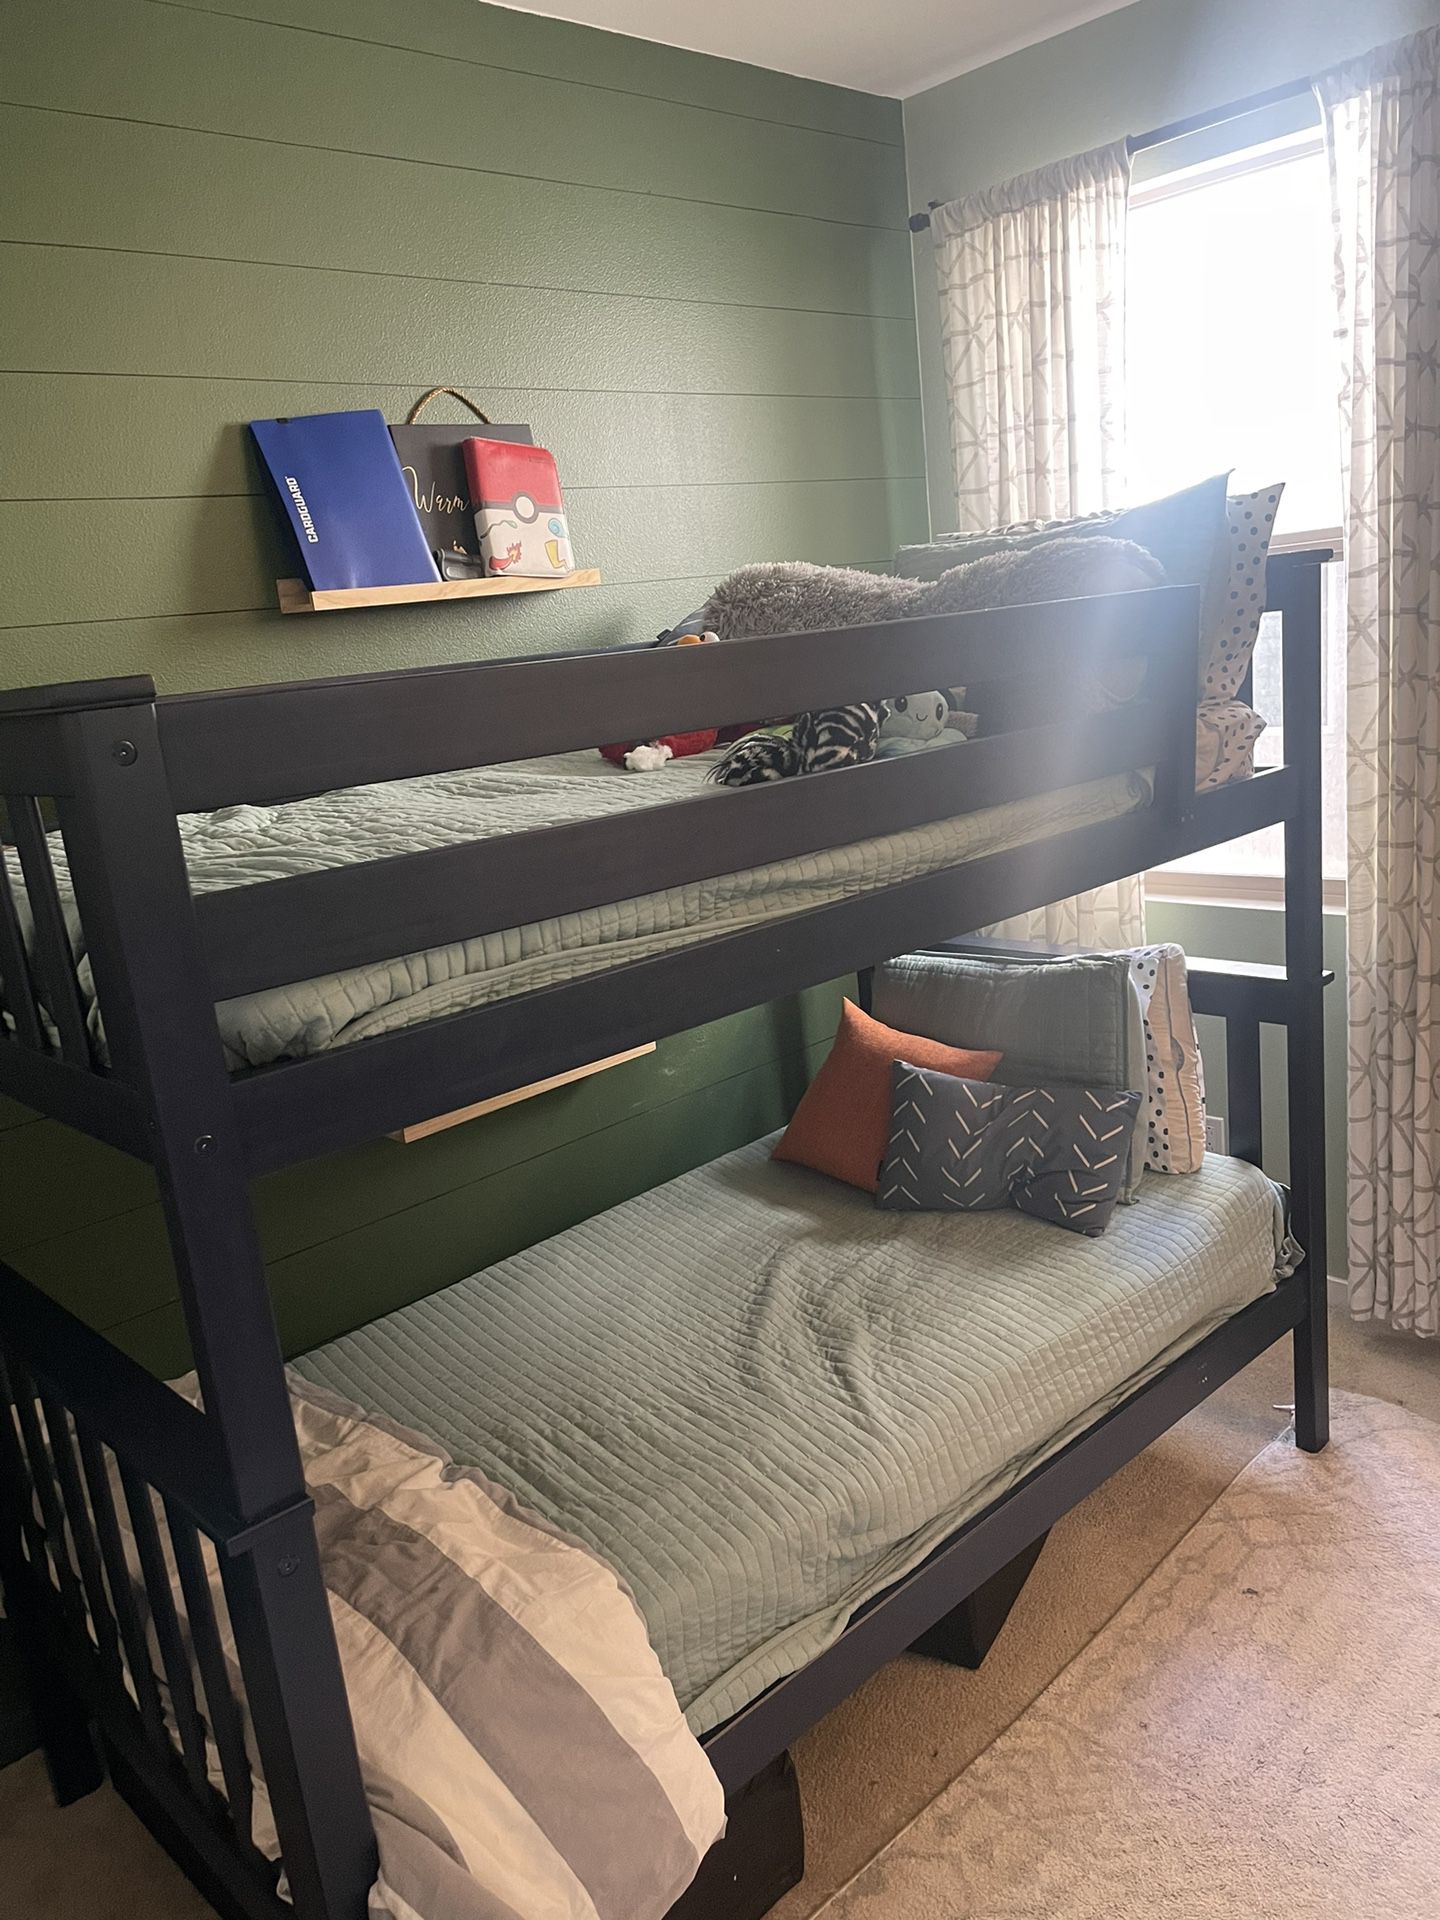 Twin Bunk Beds Looks New